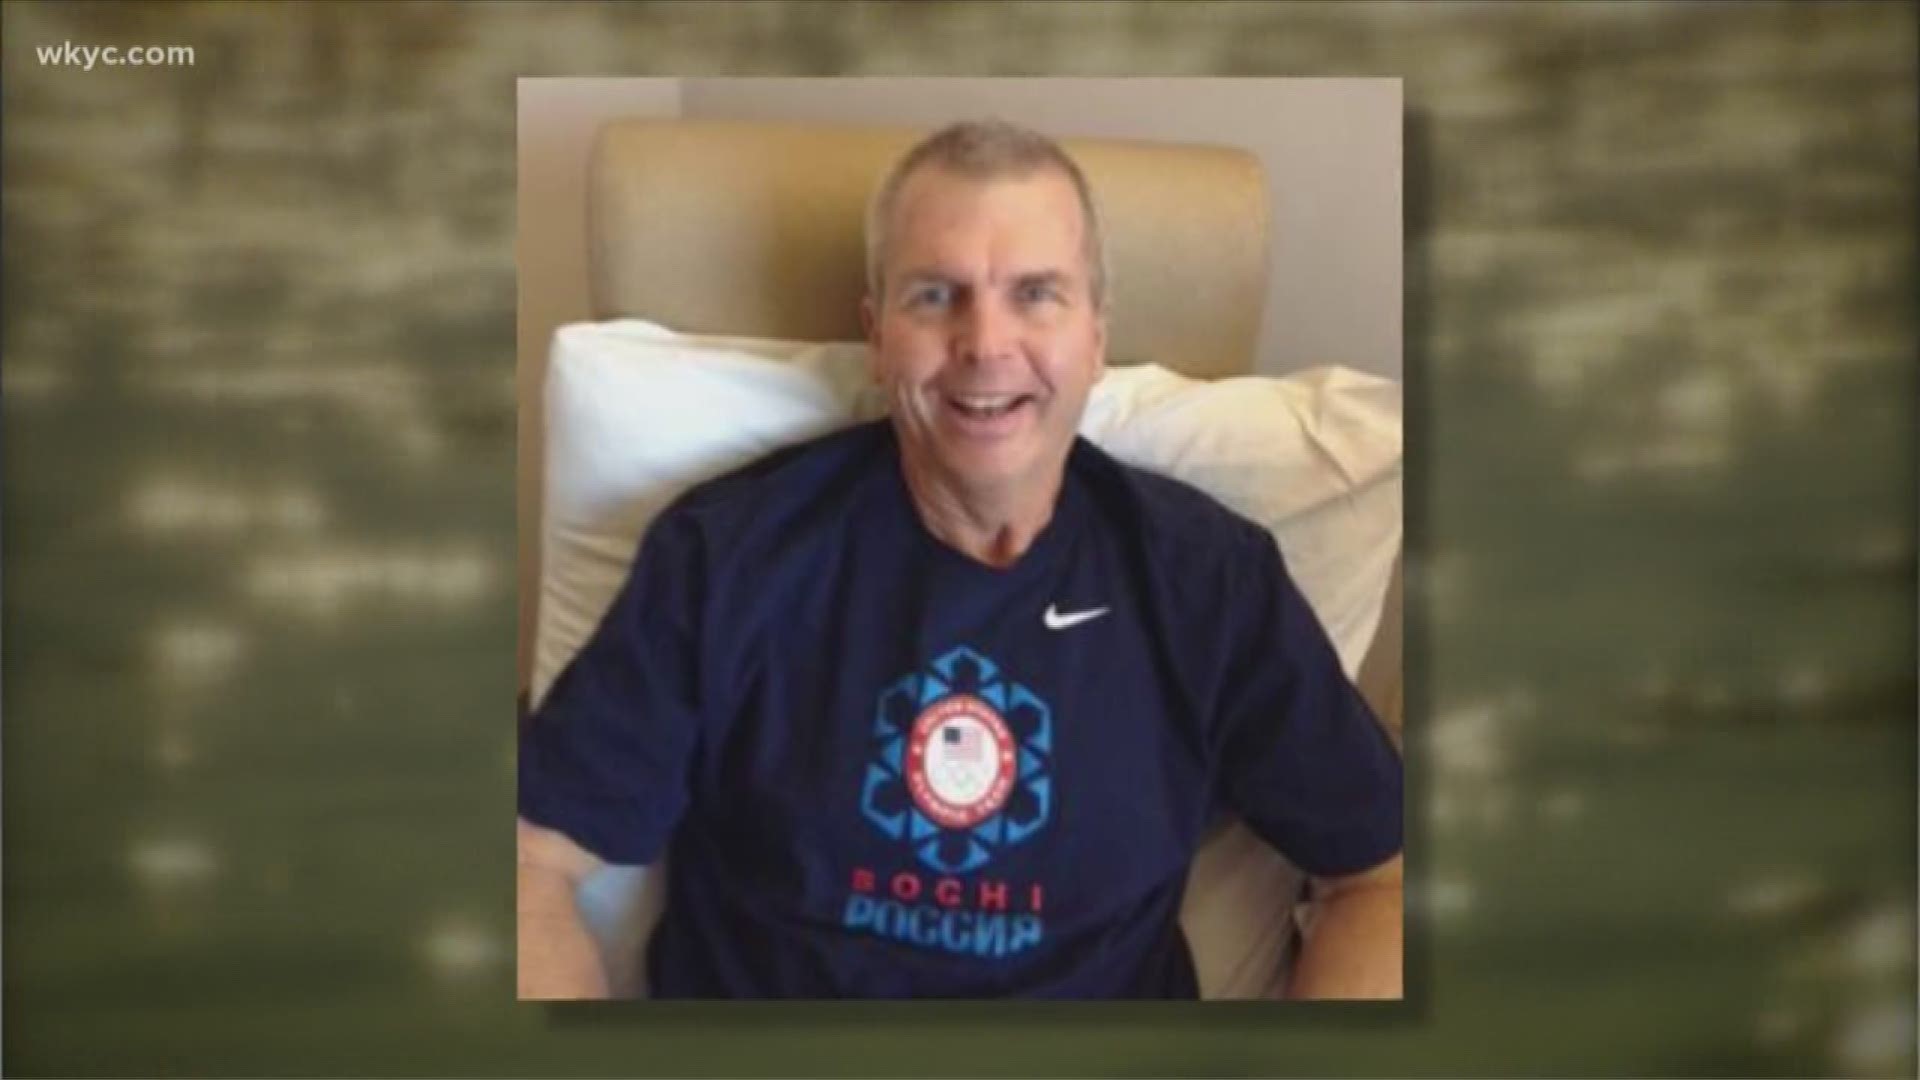 July 18, 2019: Cancer touches so many families, and the Shookmans are one of them. As WKYC partners and participates in Cleveland Clinic's VeloSano fundraiser this weekend, Channel 3 anchor Sara Shookman is sharing her father's cancer journey. Sara's dad, Scott, was diagnosed with appendiceal cancer in 2013 and passed away on Feb. 15, 2015.